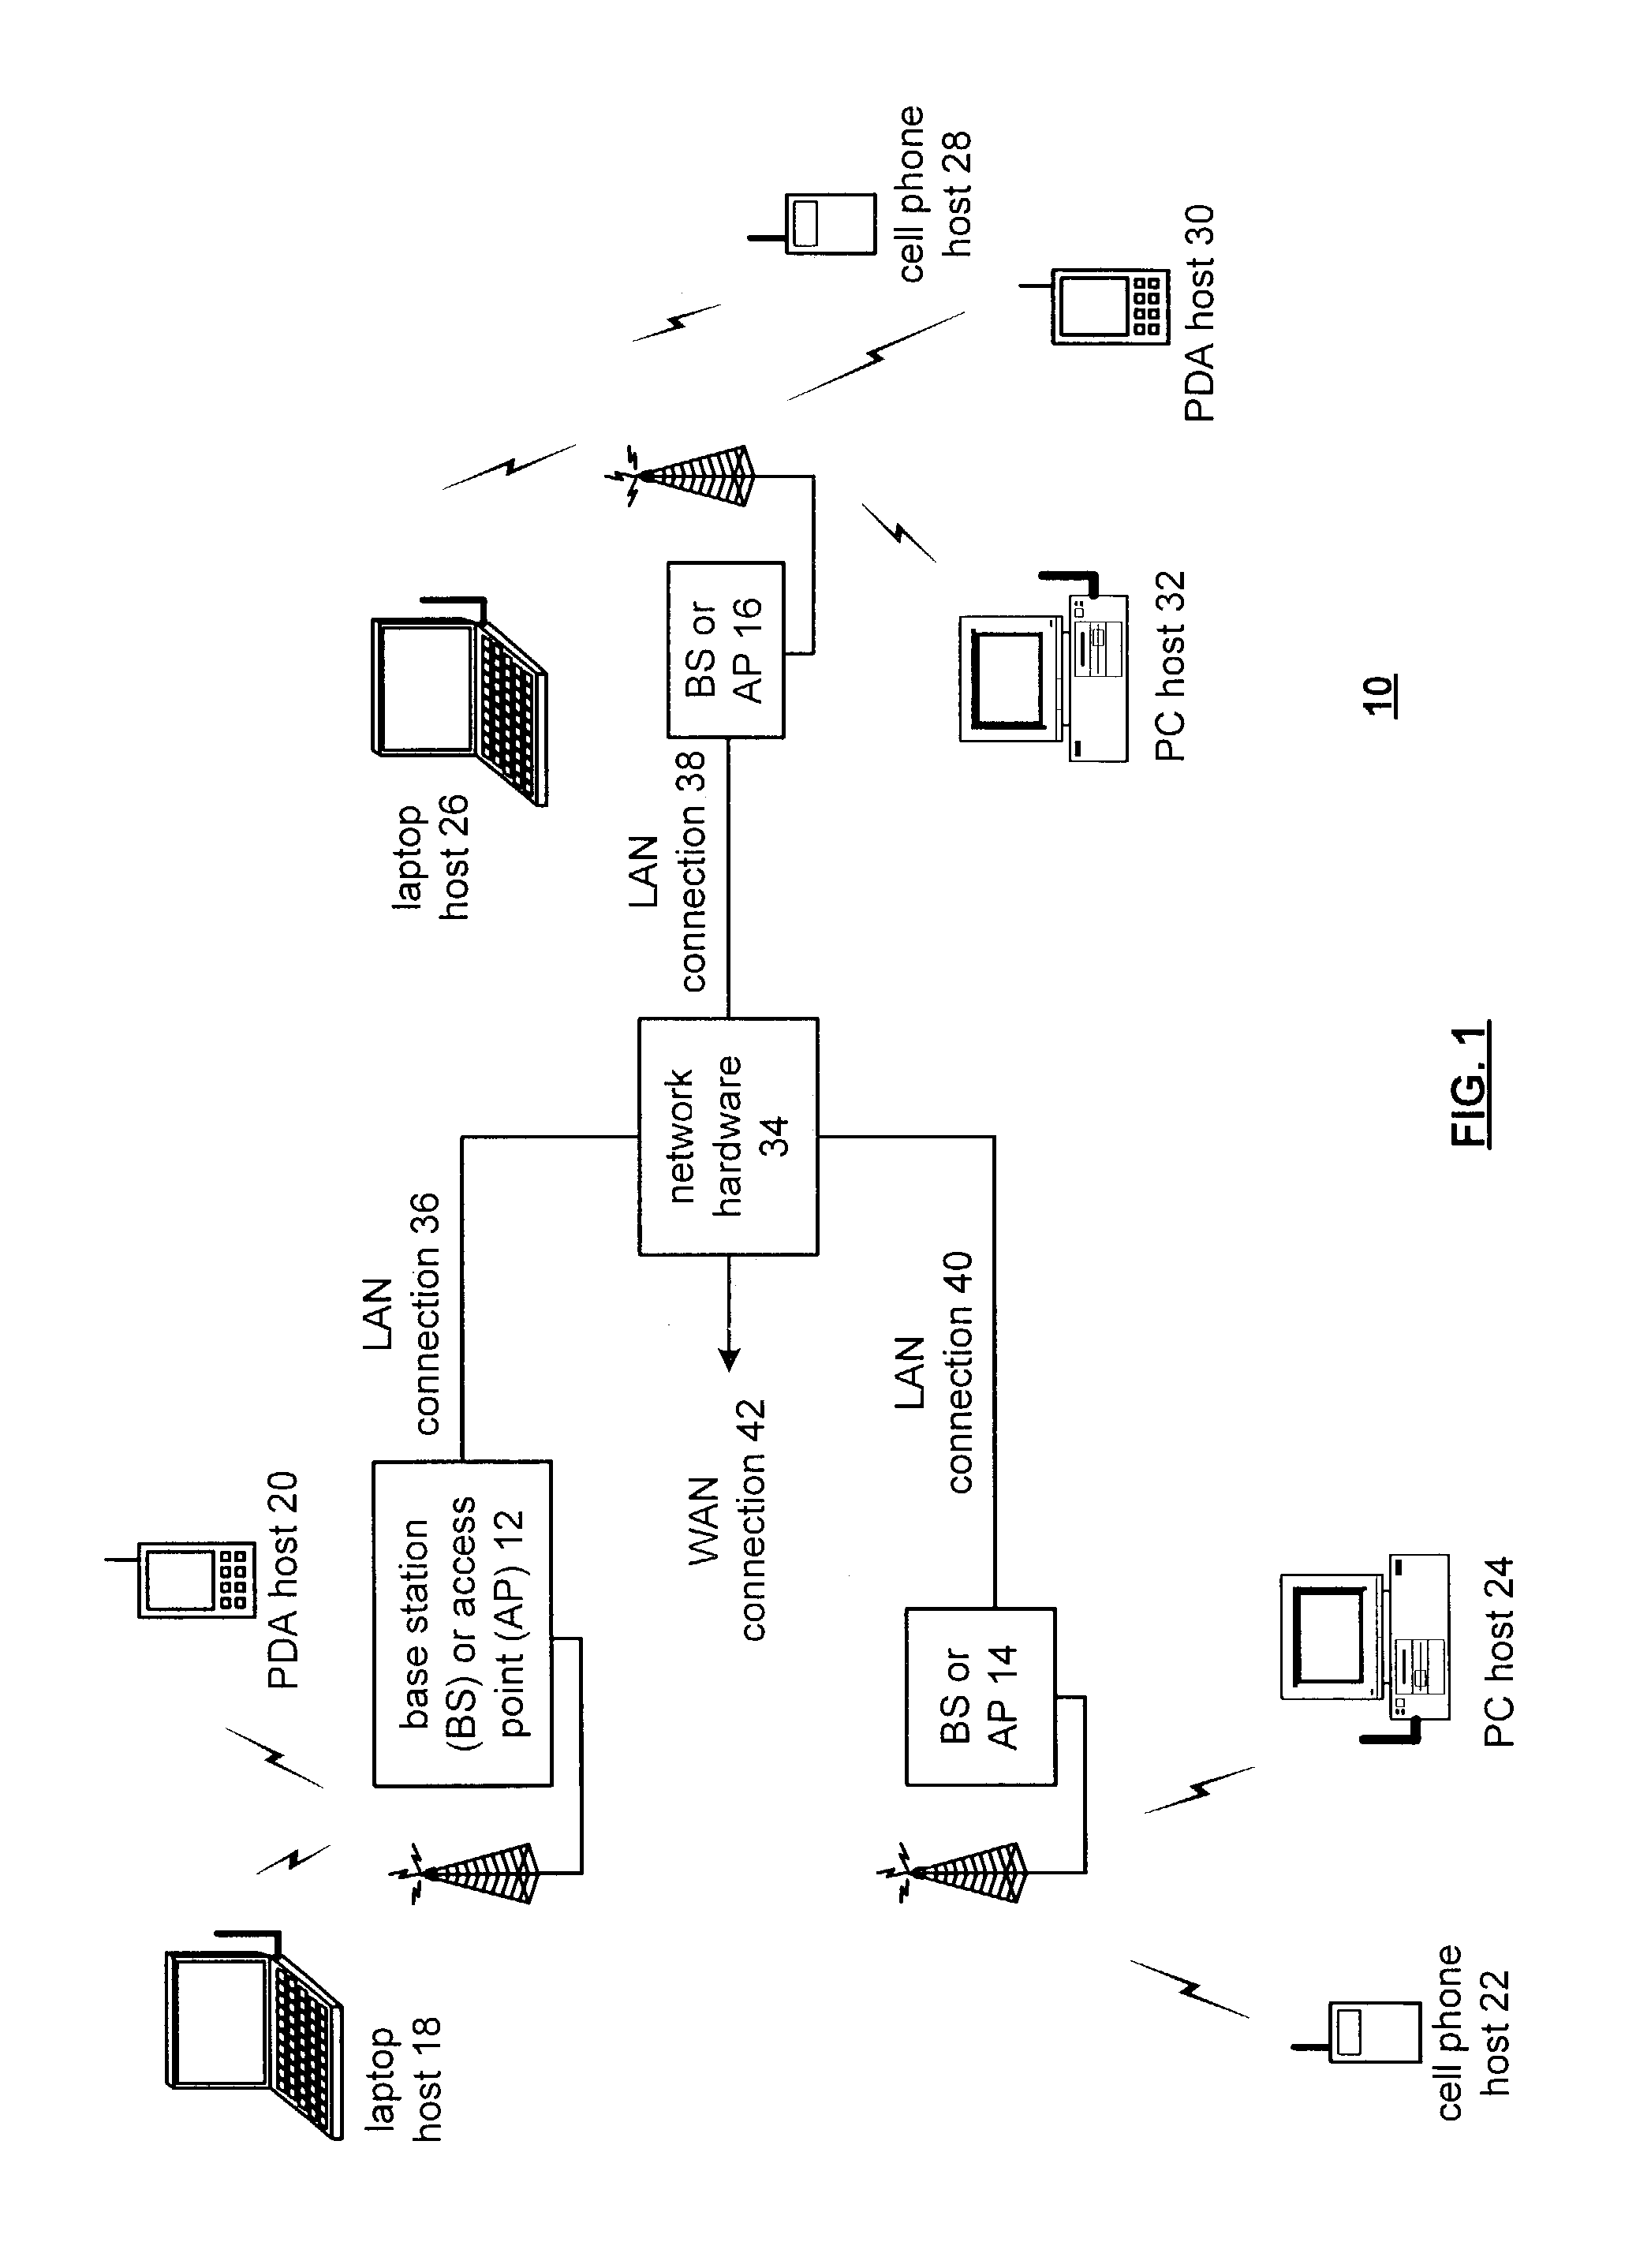 On-chip loop filter for use in a phase locked loop and other applications